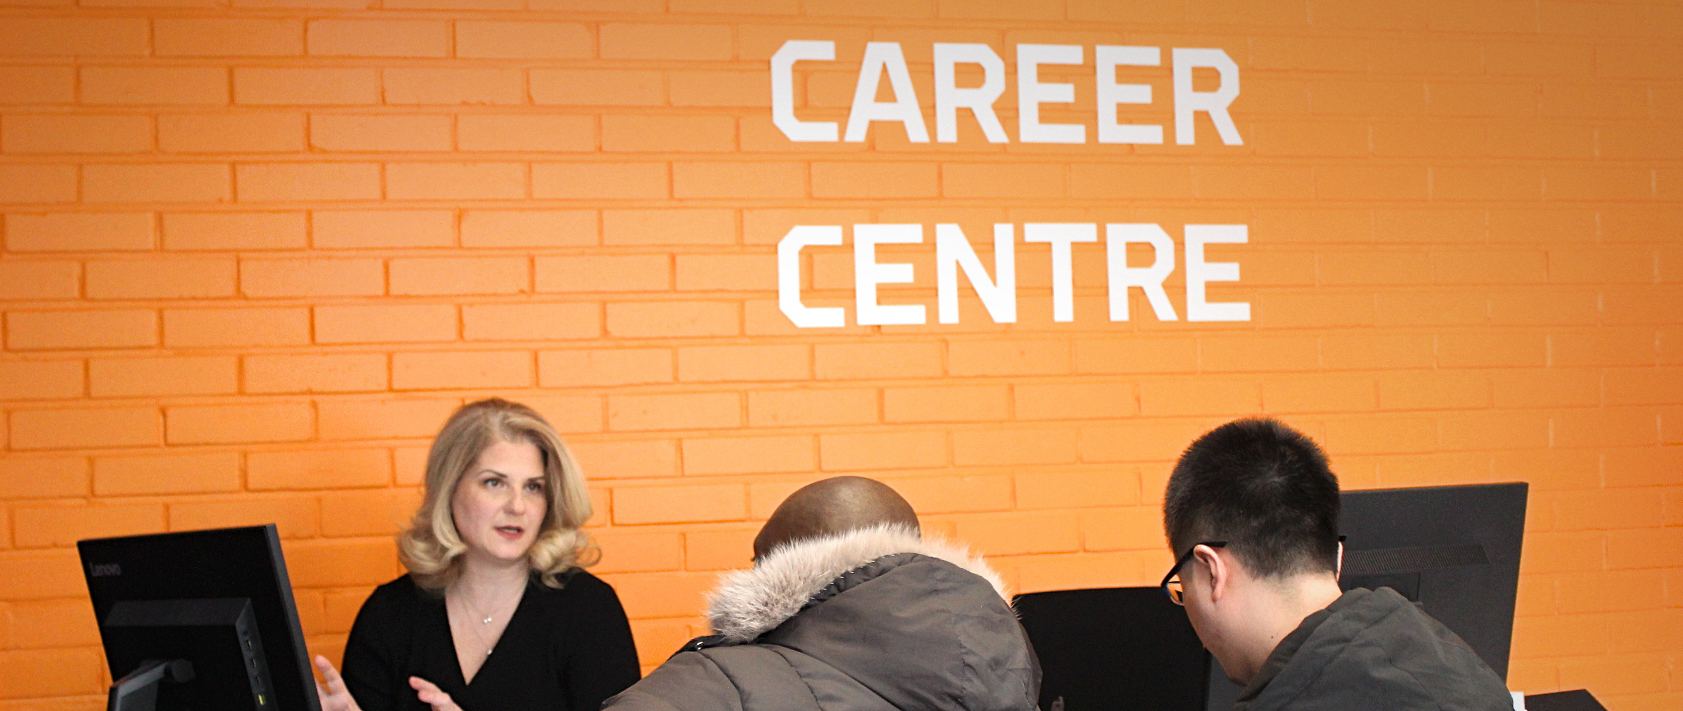 Three persons at the Career center